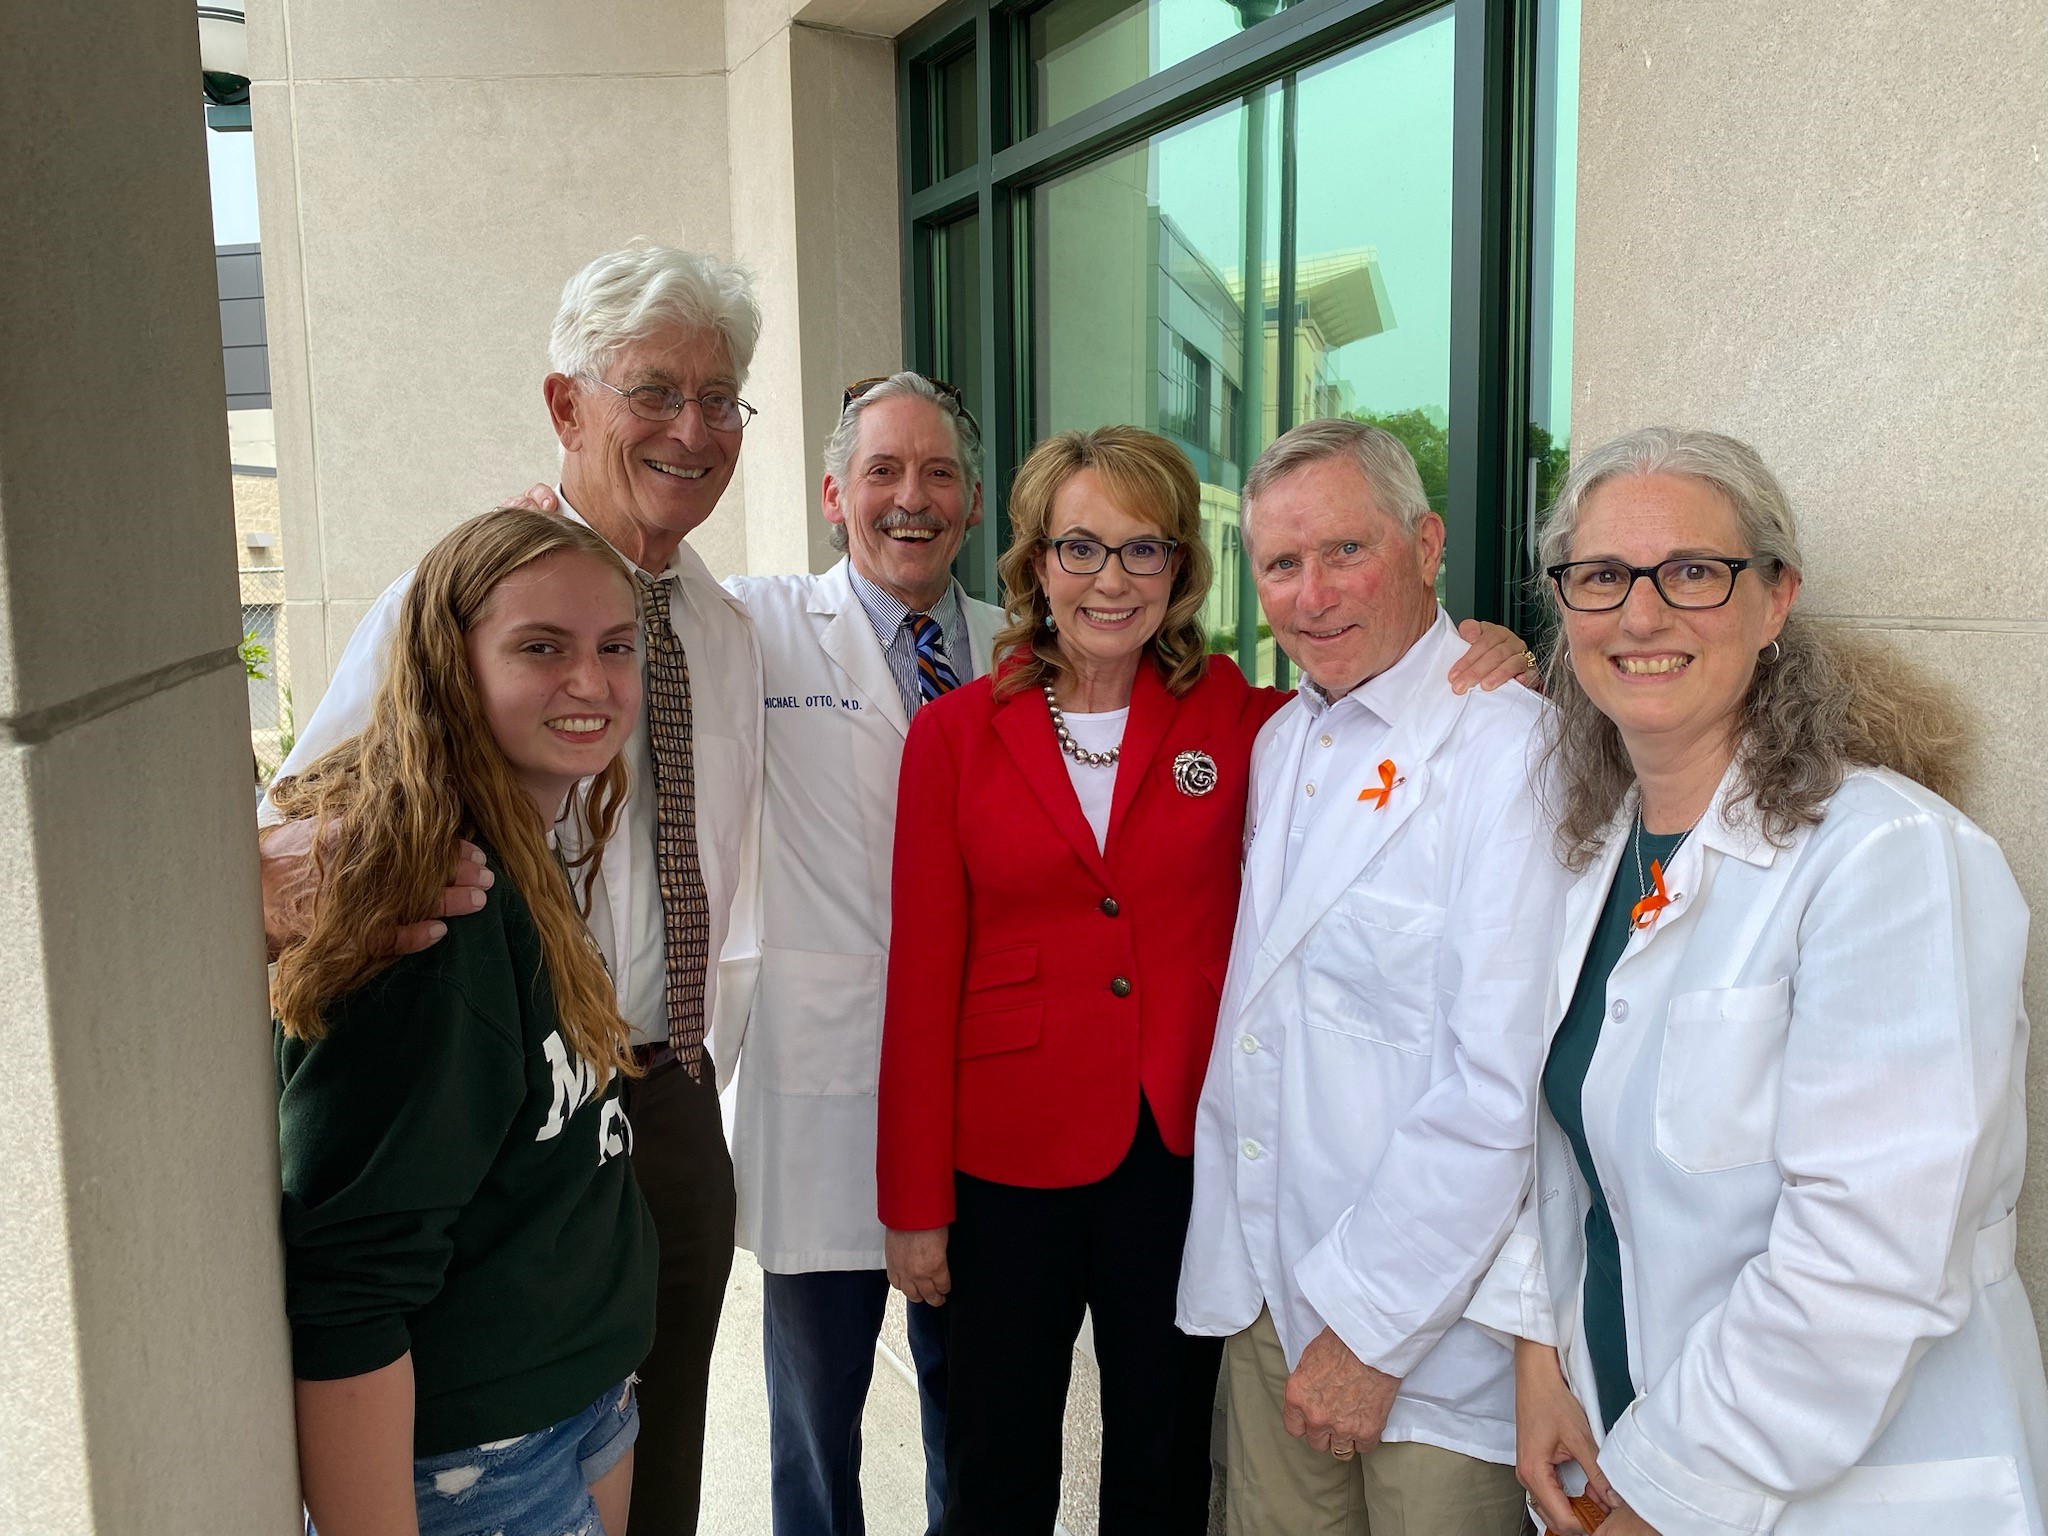 Dr. Jerry Walden with Gabby Giffords at Gov. Whitmer's "red flag law" bill signing